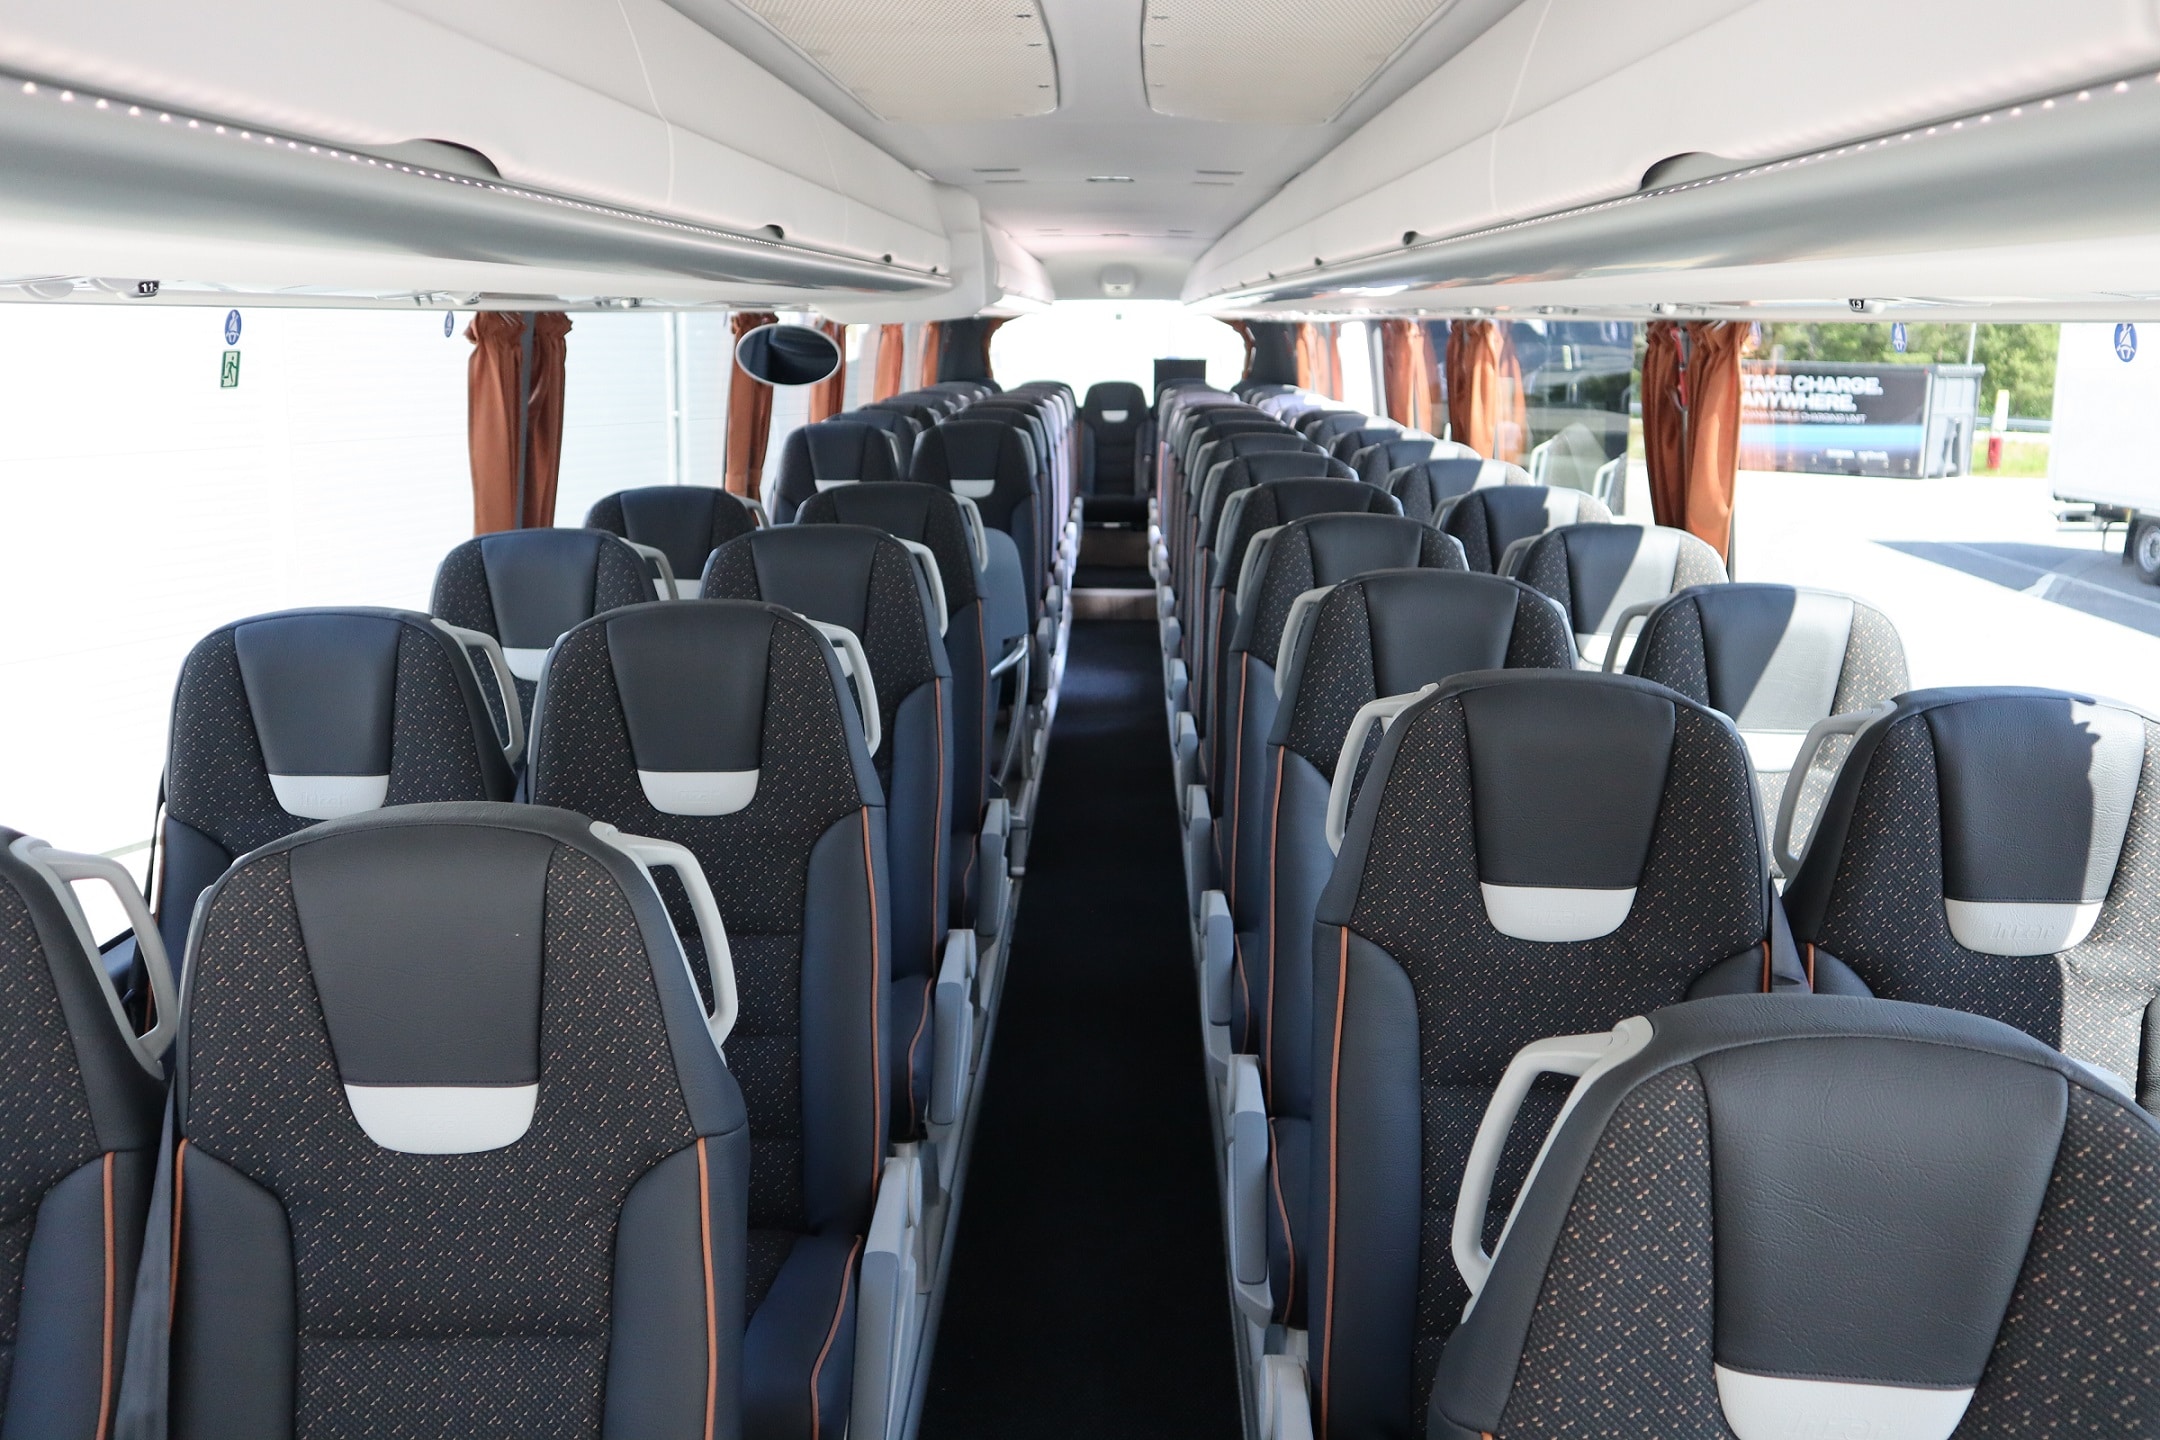 Interior view of 59 Irizar i6S seats in the demonstrator